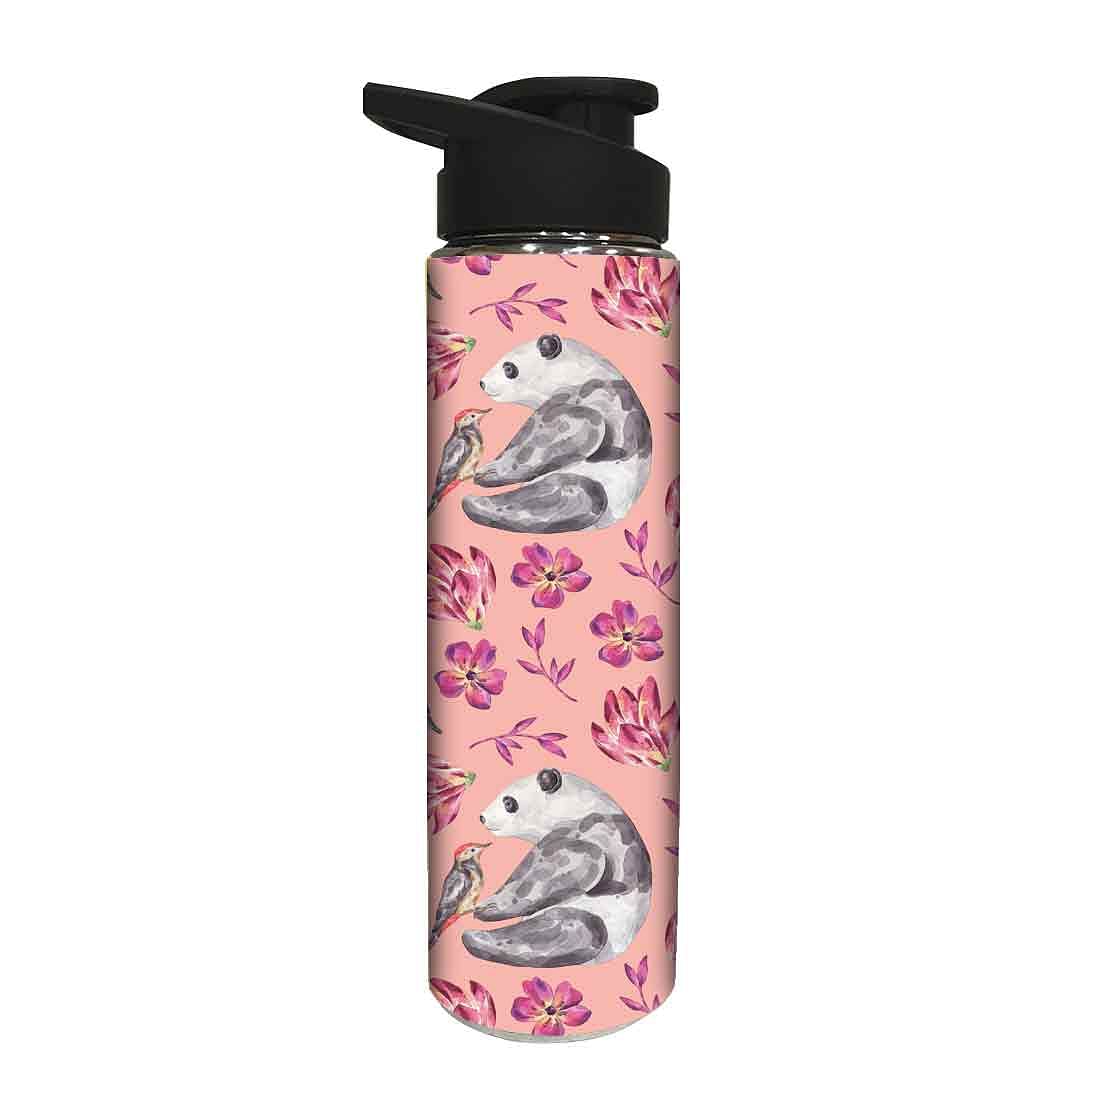 Stainless Steel Sipper Bottle -  Panda and Bird Nutcase